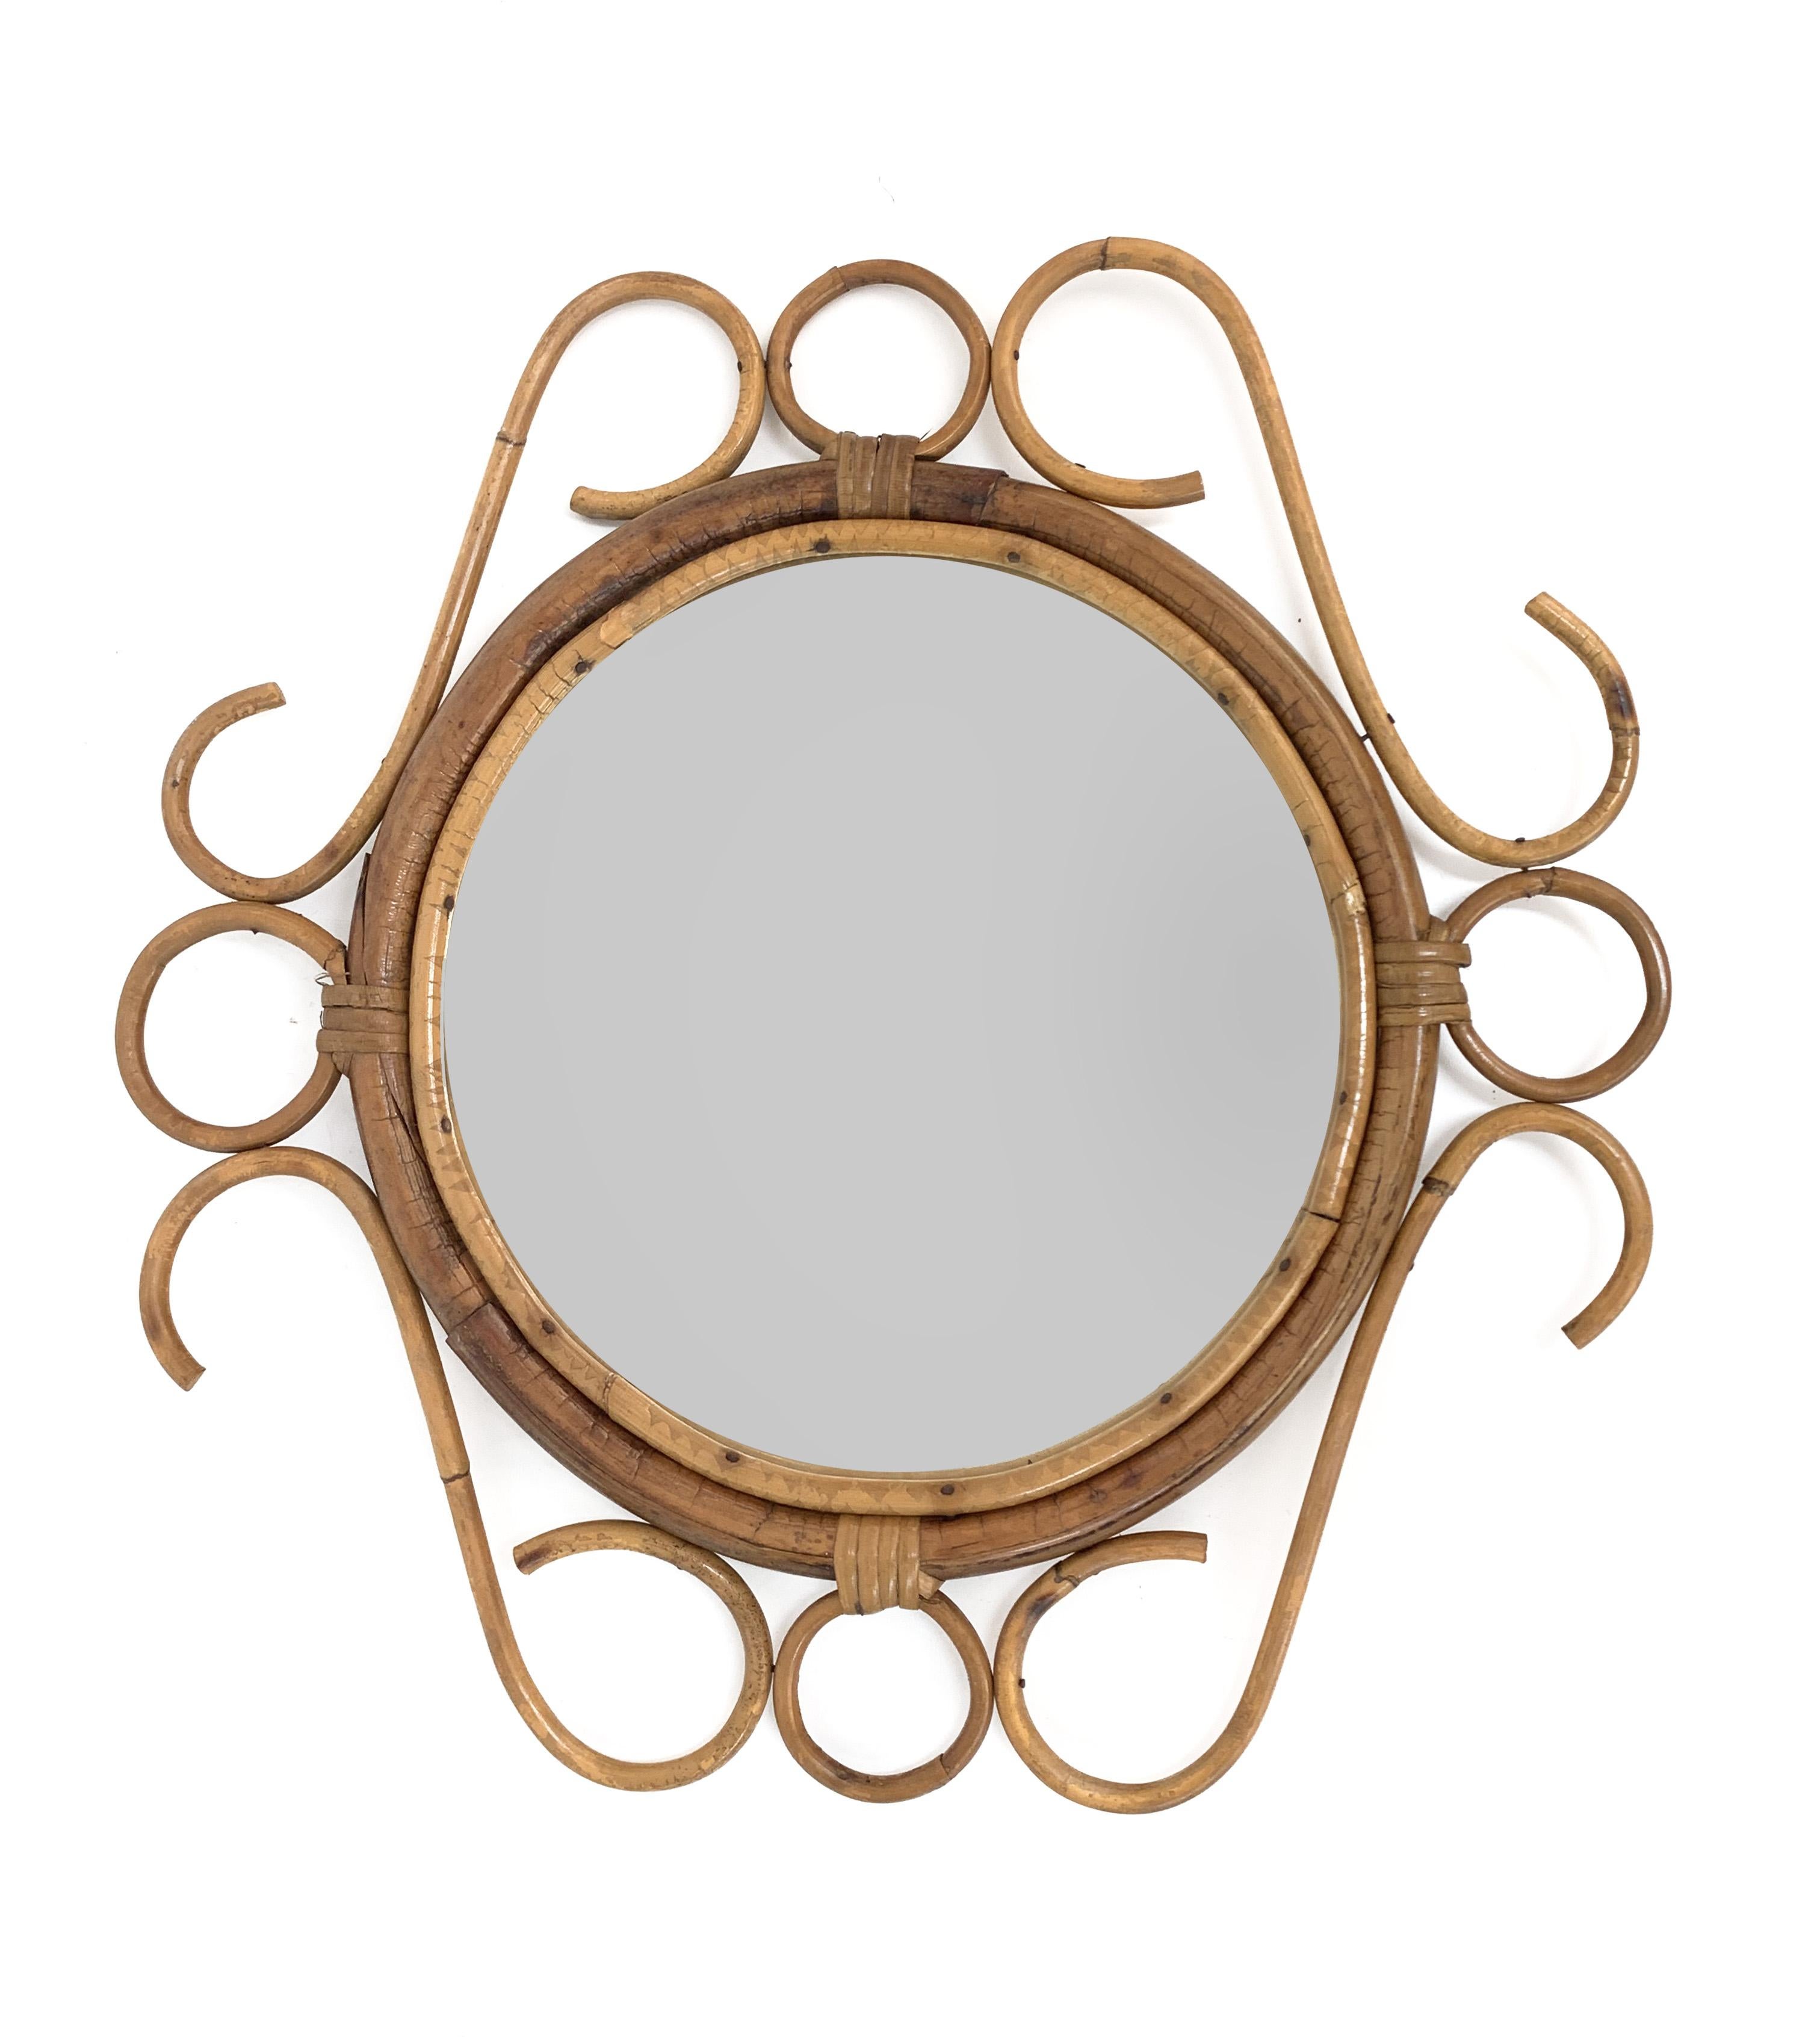 Cote d'Azur round wall mirror with bamboo and rattan frame, made in France in the 1960s. It is attributed to the craftsmanship of Franco Albini.

This fantastic mirror is in its original and good condition. It has the unmistakable design of the